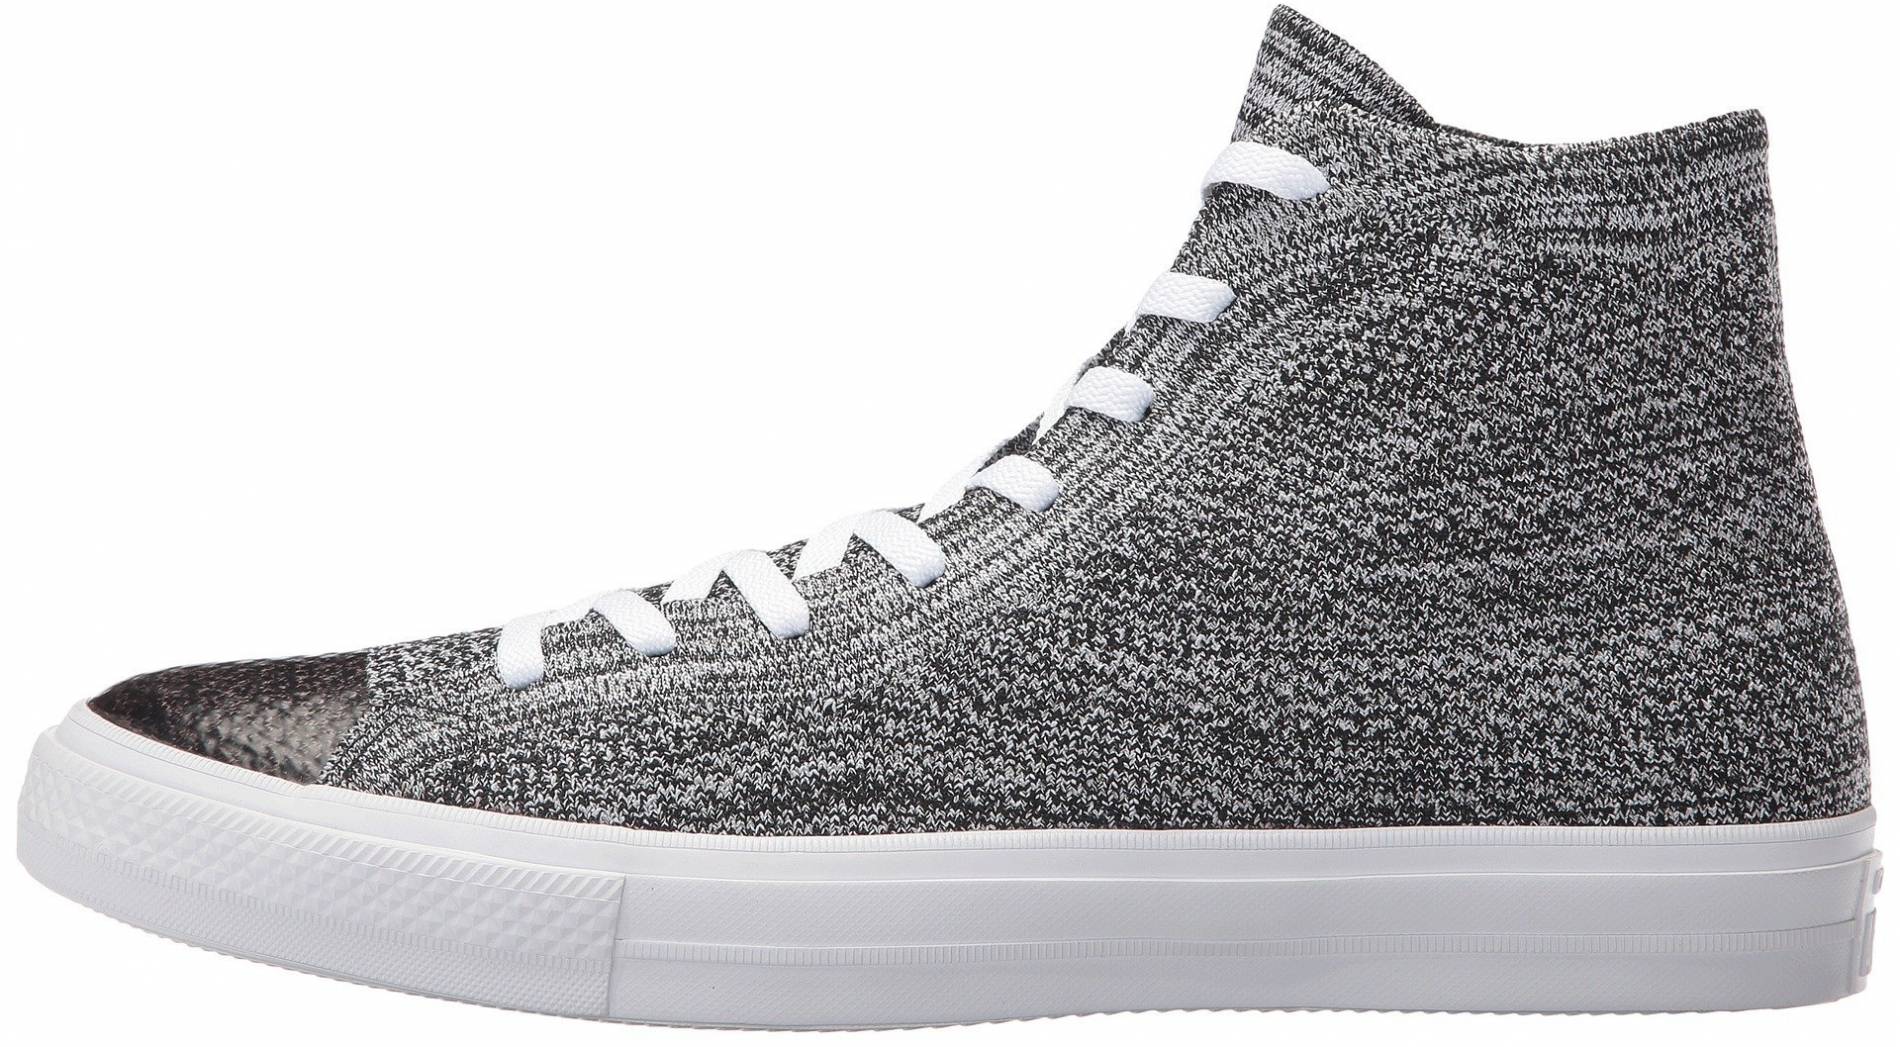 Preservativo Desviación Ewell Converse Chuck Taylor All Star x Nike Flyknit High Top sneakers in black  (only $90) | RunRepeat